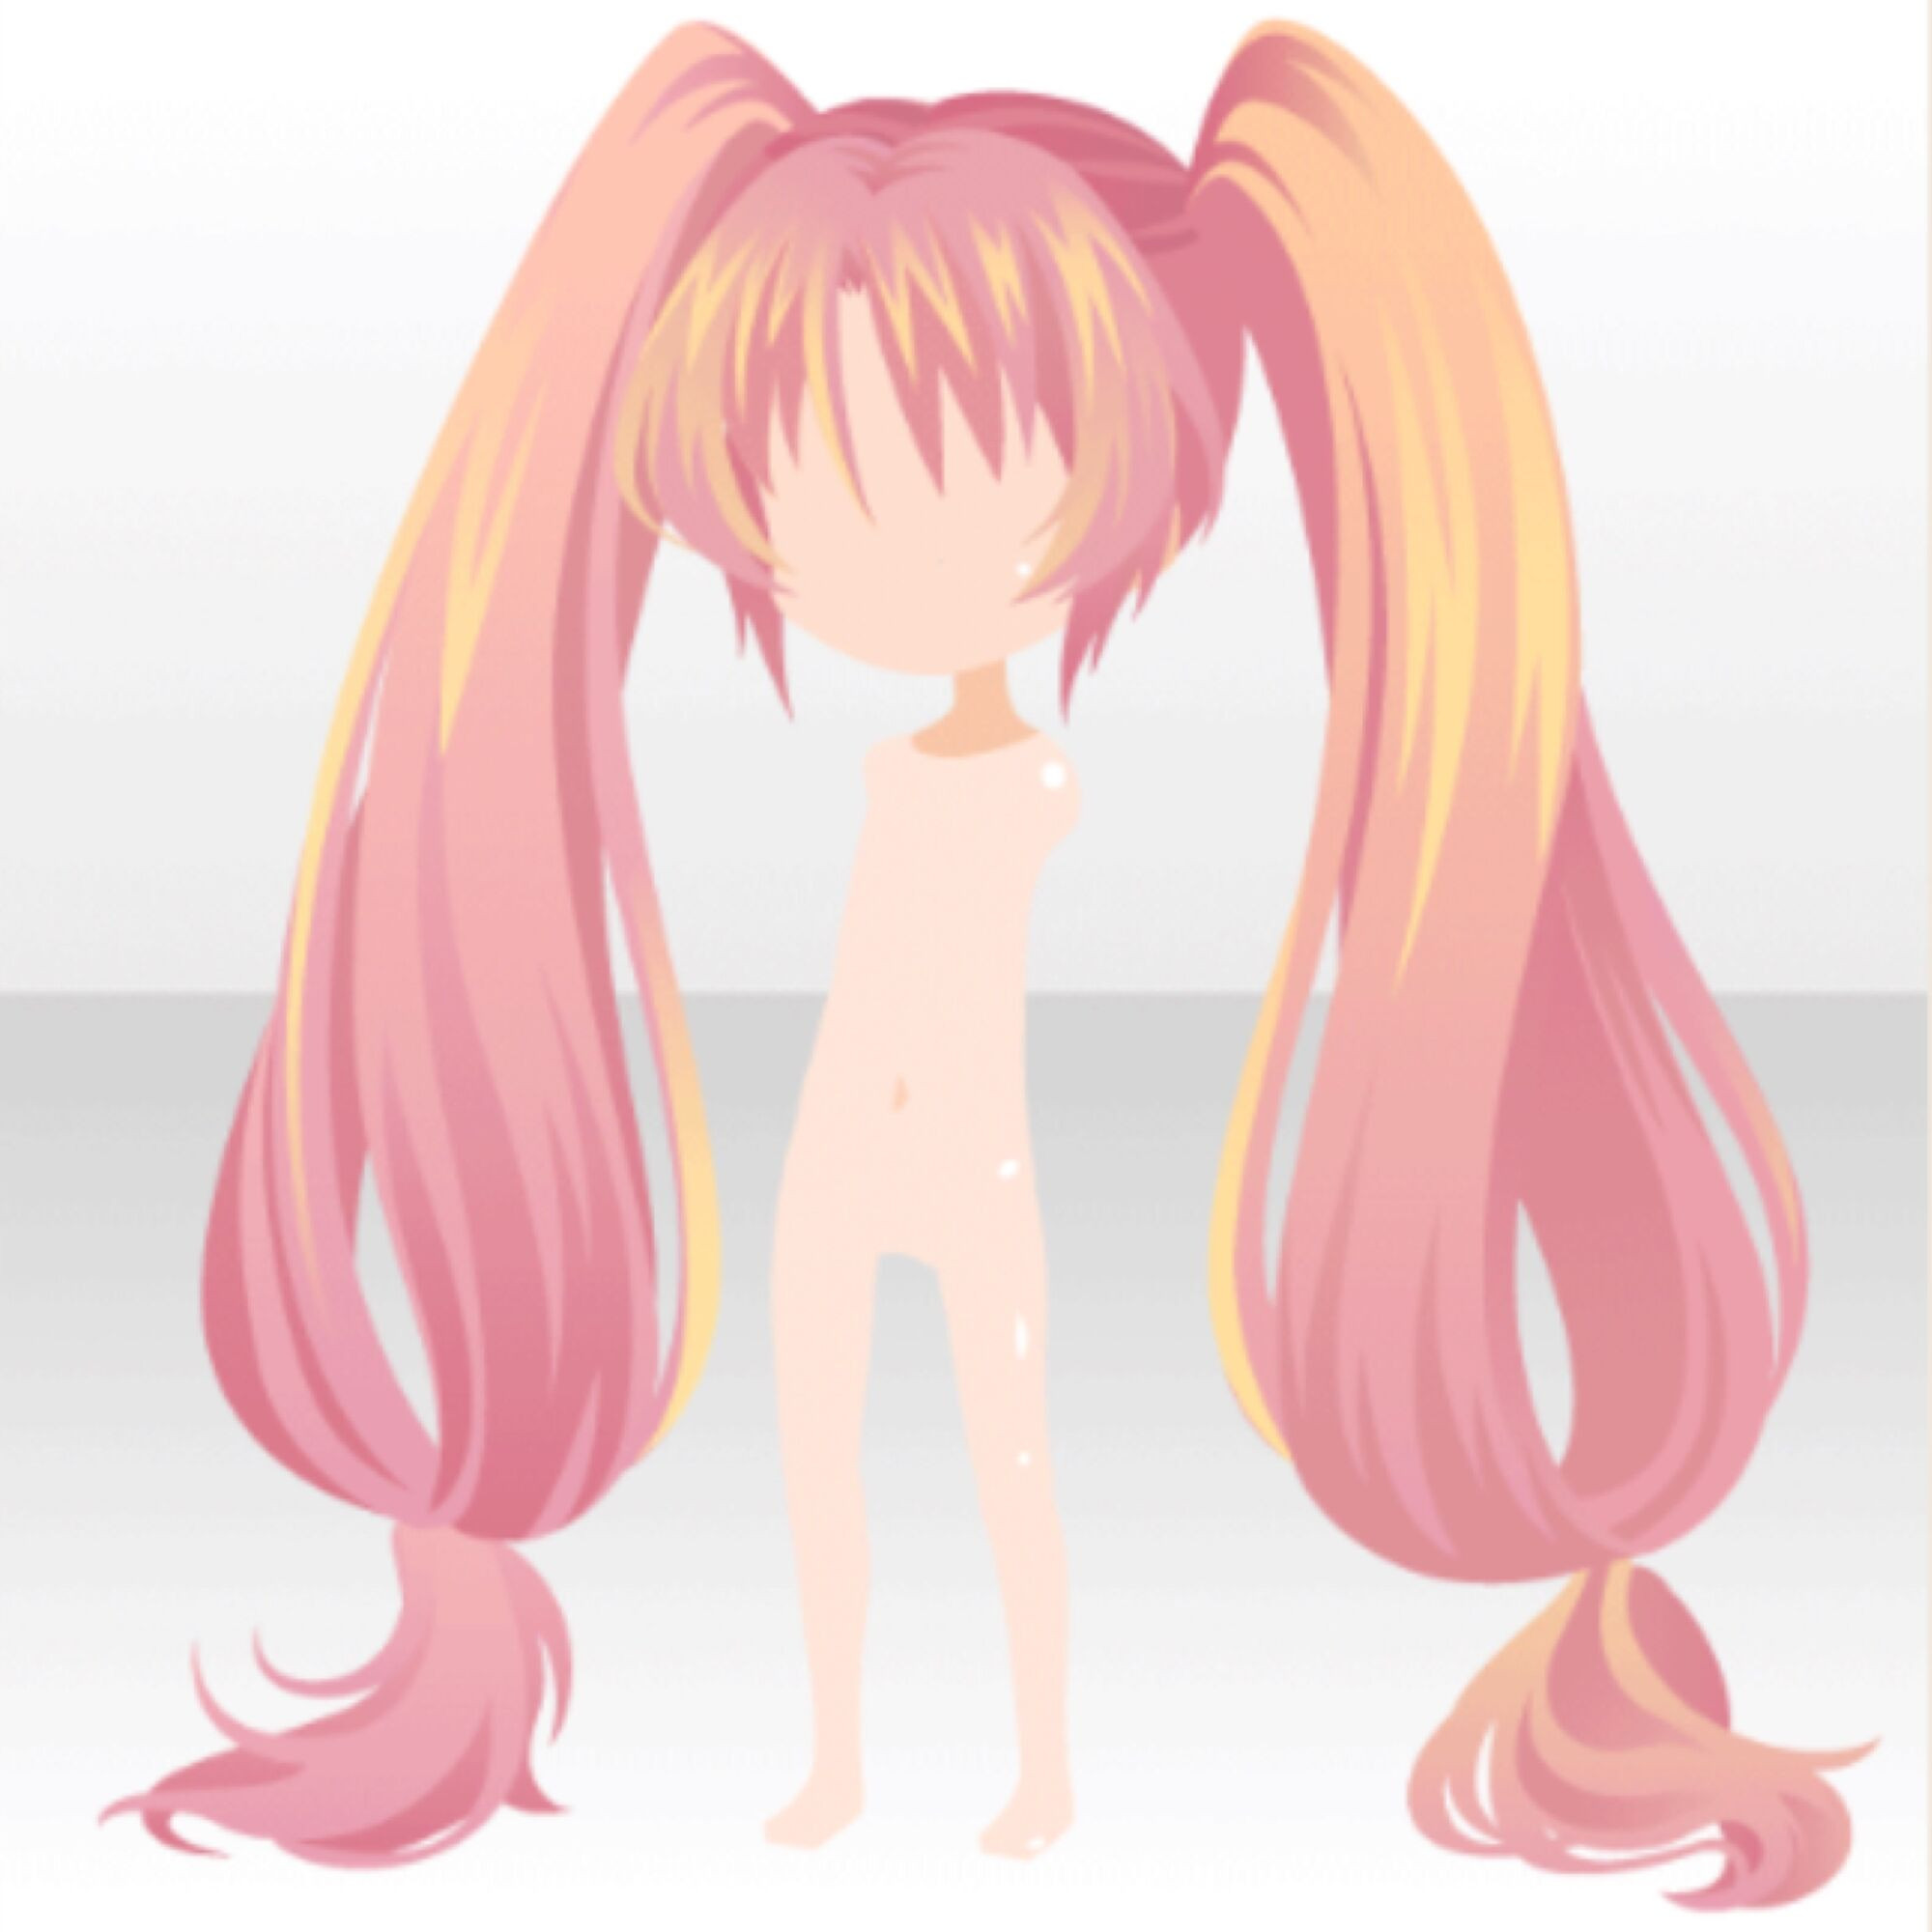 Anime Pigtail Hairstyles
 Image Hairstyle Long Pigtails ver A pink